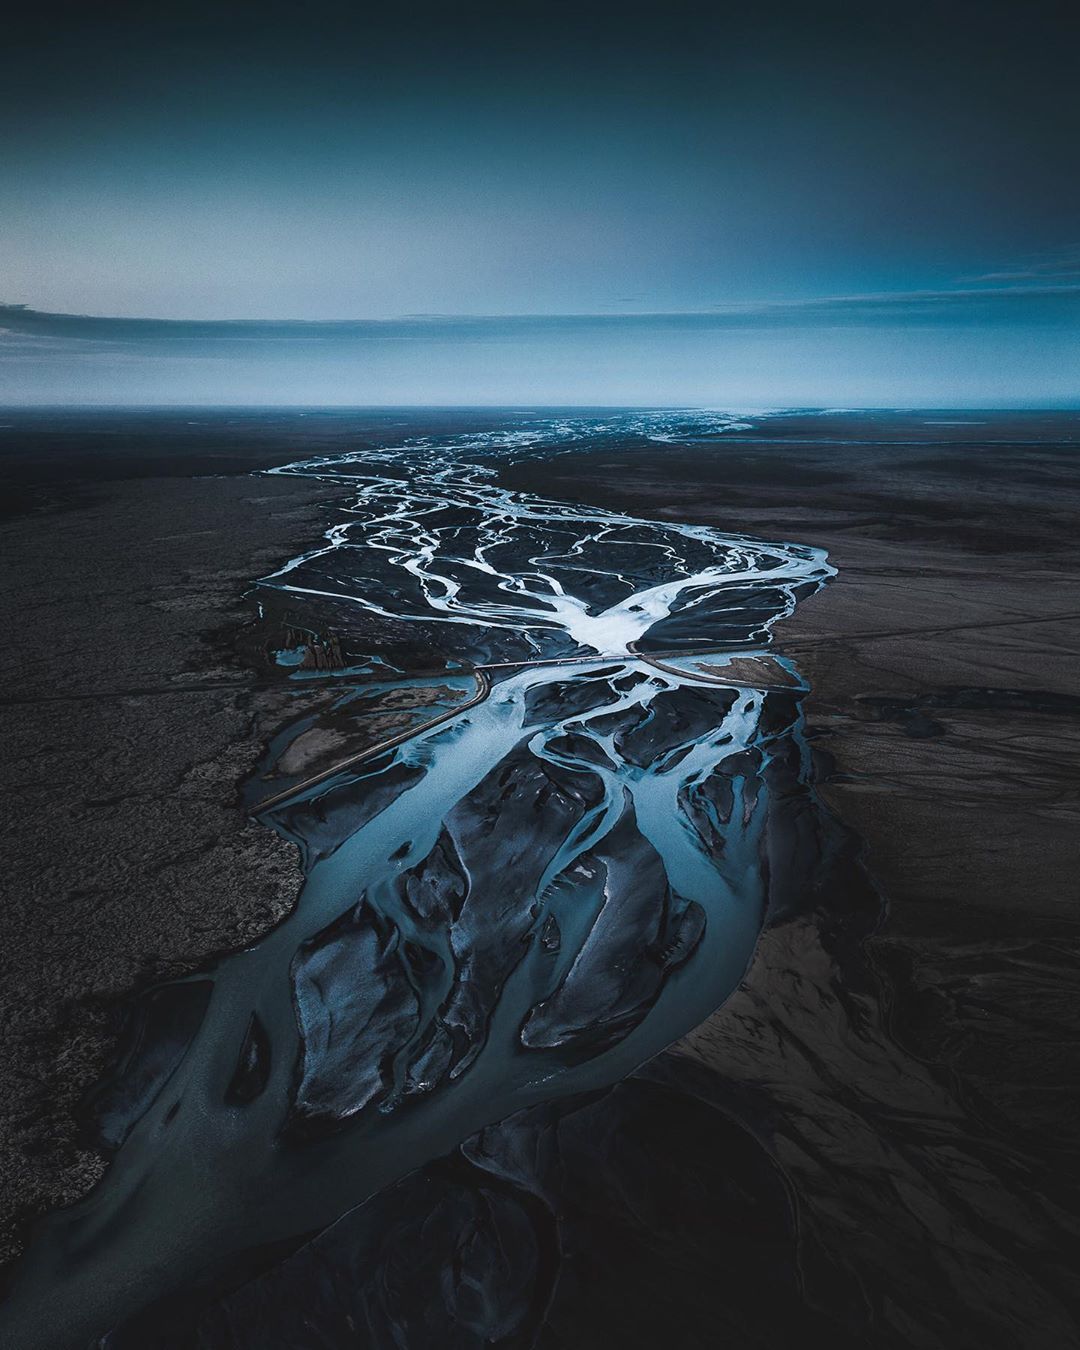 Garðar Ólafs | Iceland 🇮🇸 on Instagram: “Crossing rivers in the Blue Hour 💙 • • • • • • • #iceland #drone #aerialphotography #photography #mavicpro #landscape #nature…”